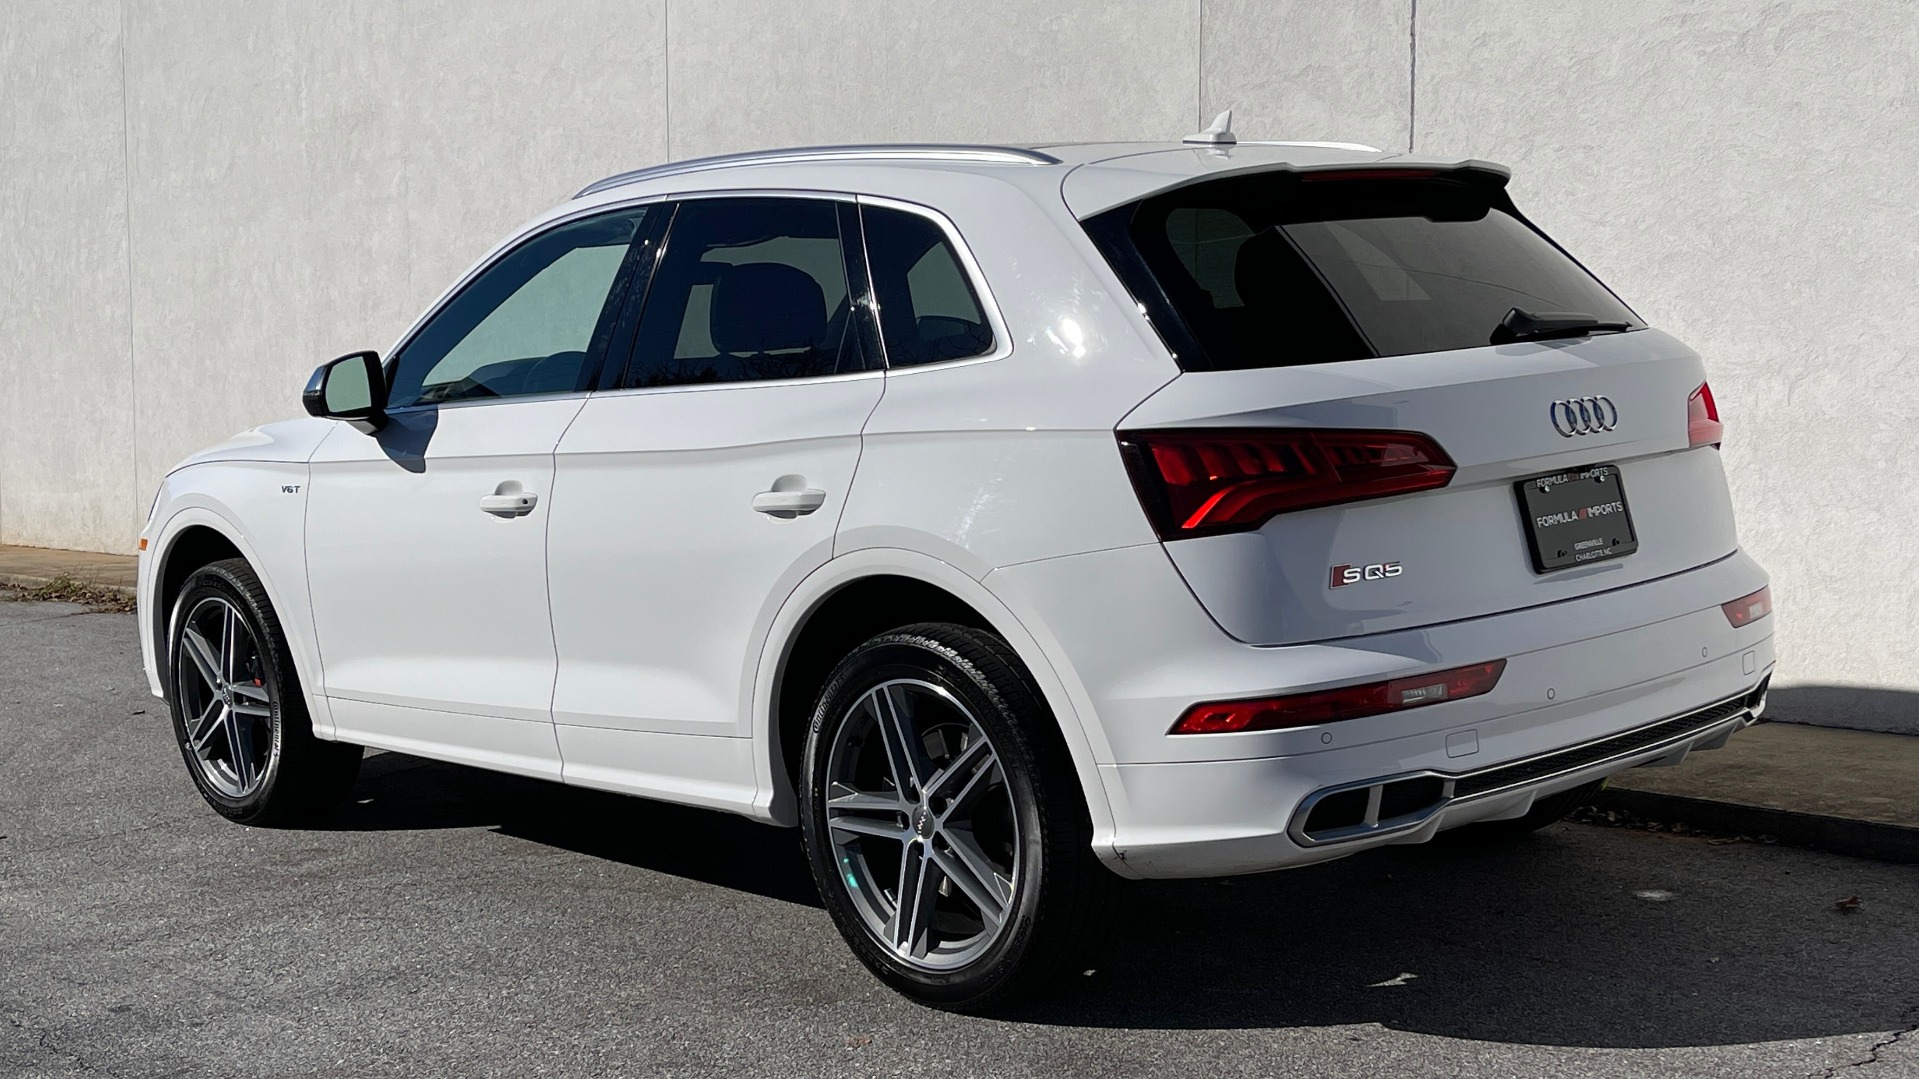 Used 2018 Audi SQ5 PREMIUM PLUS / NAV / SUNROOF / 12.3IN SCREEN / REARVIEW for sale Sold at Formula Imports in Charlotte NC 28227 4